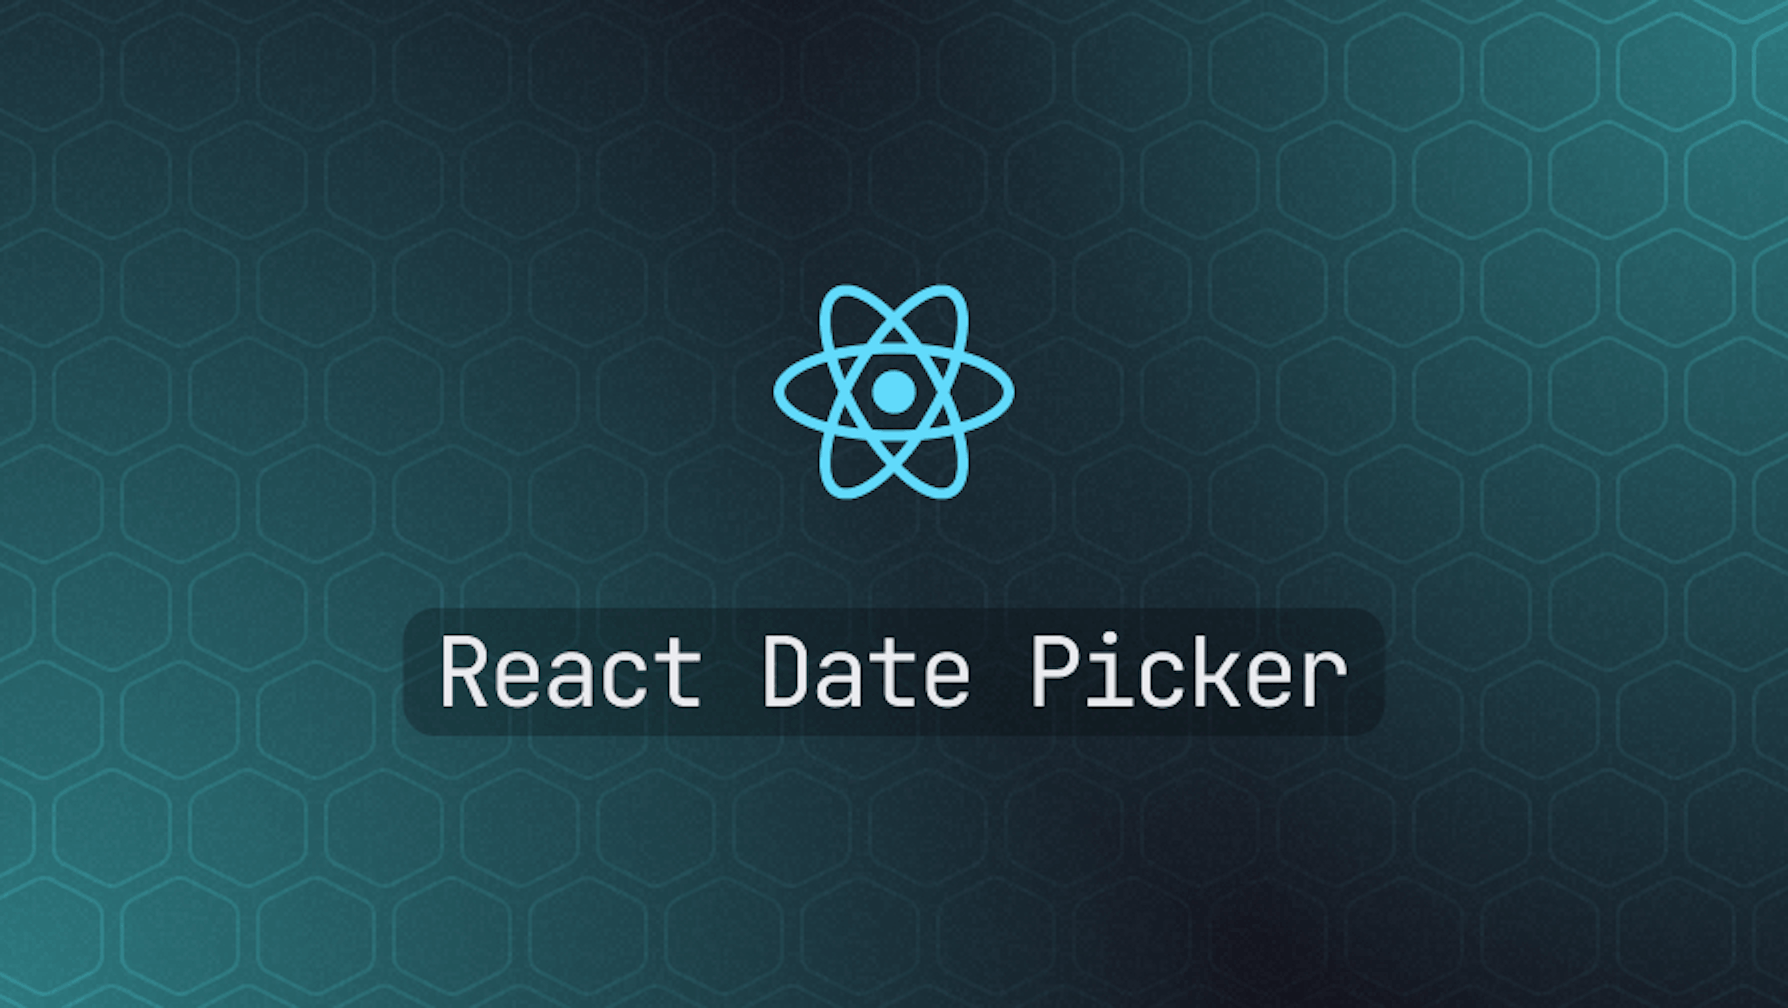 How to implement a date picker in React